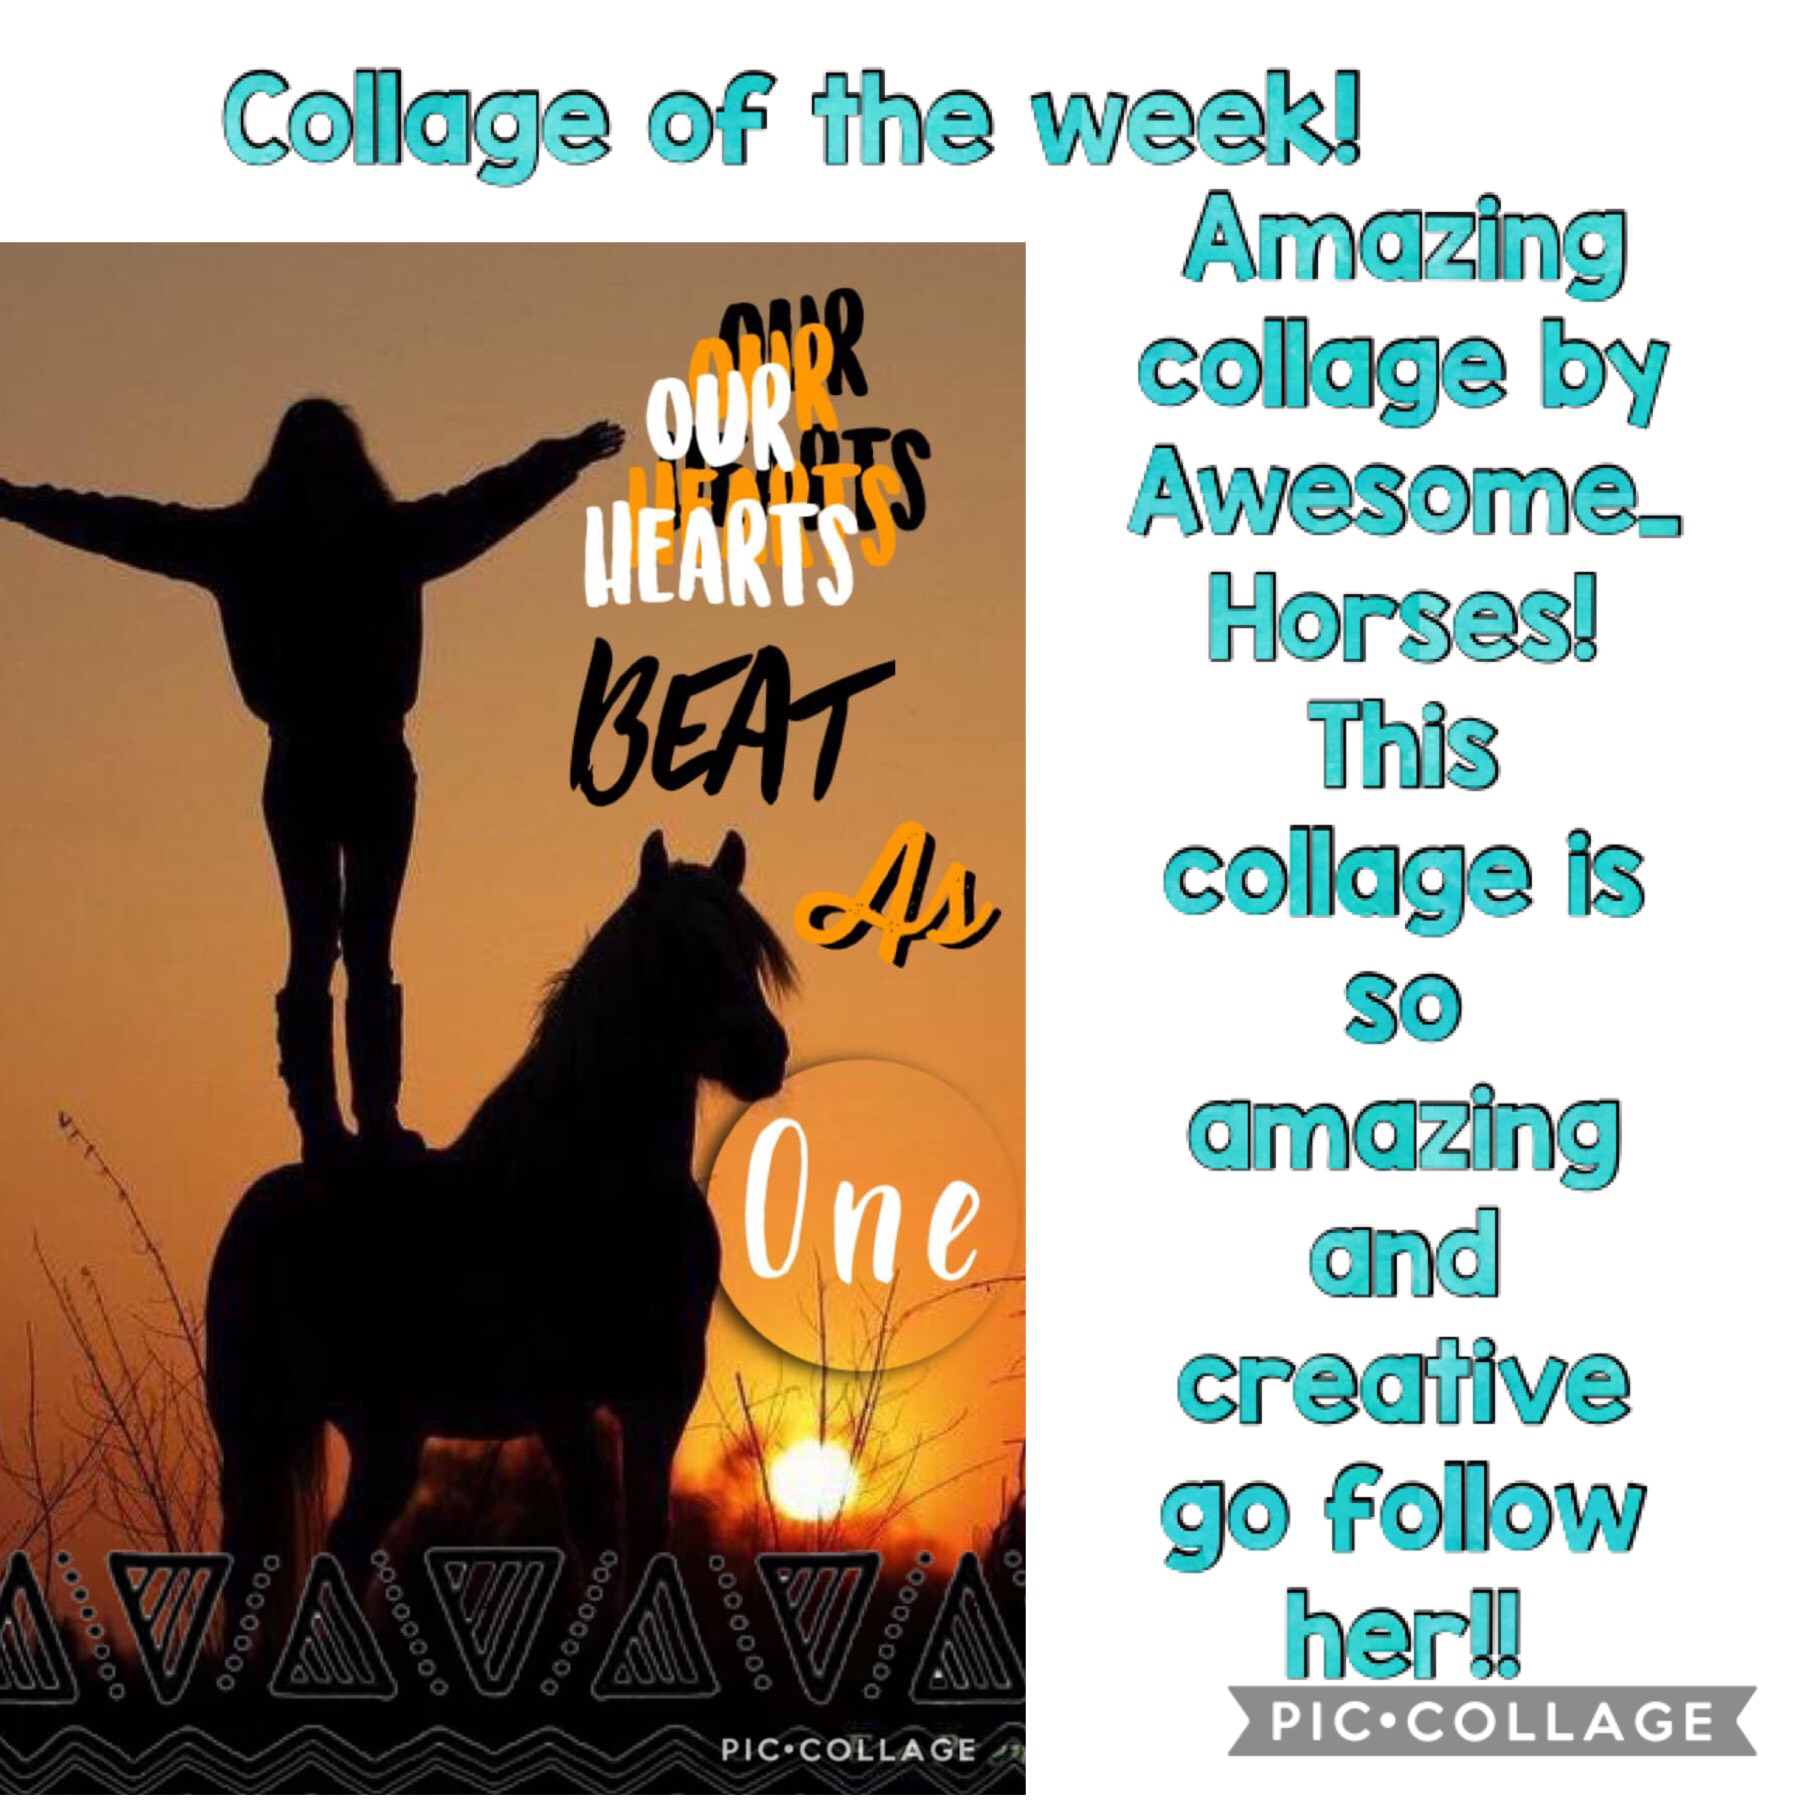 Collage of the week!